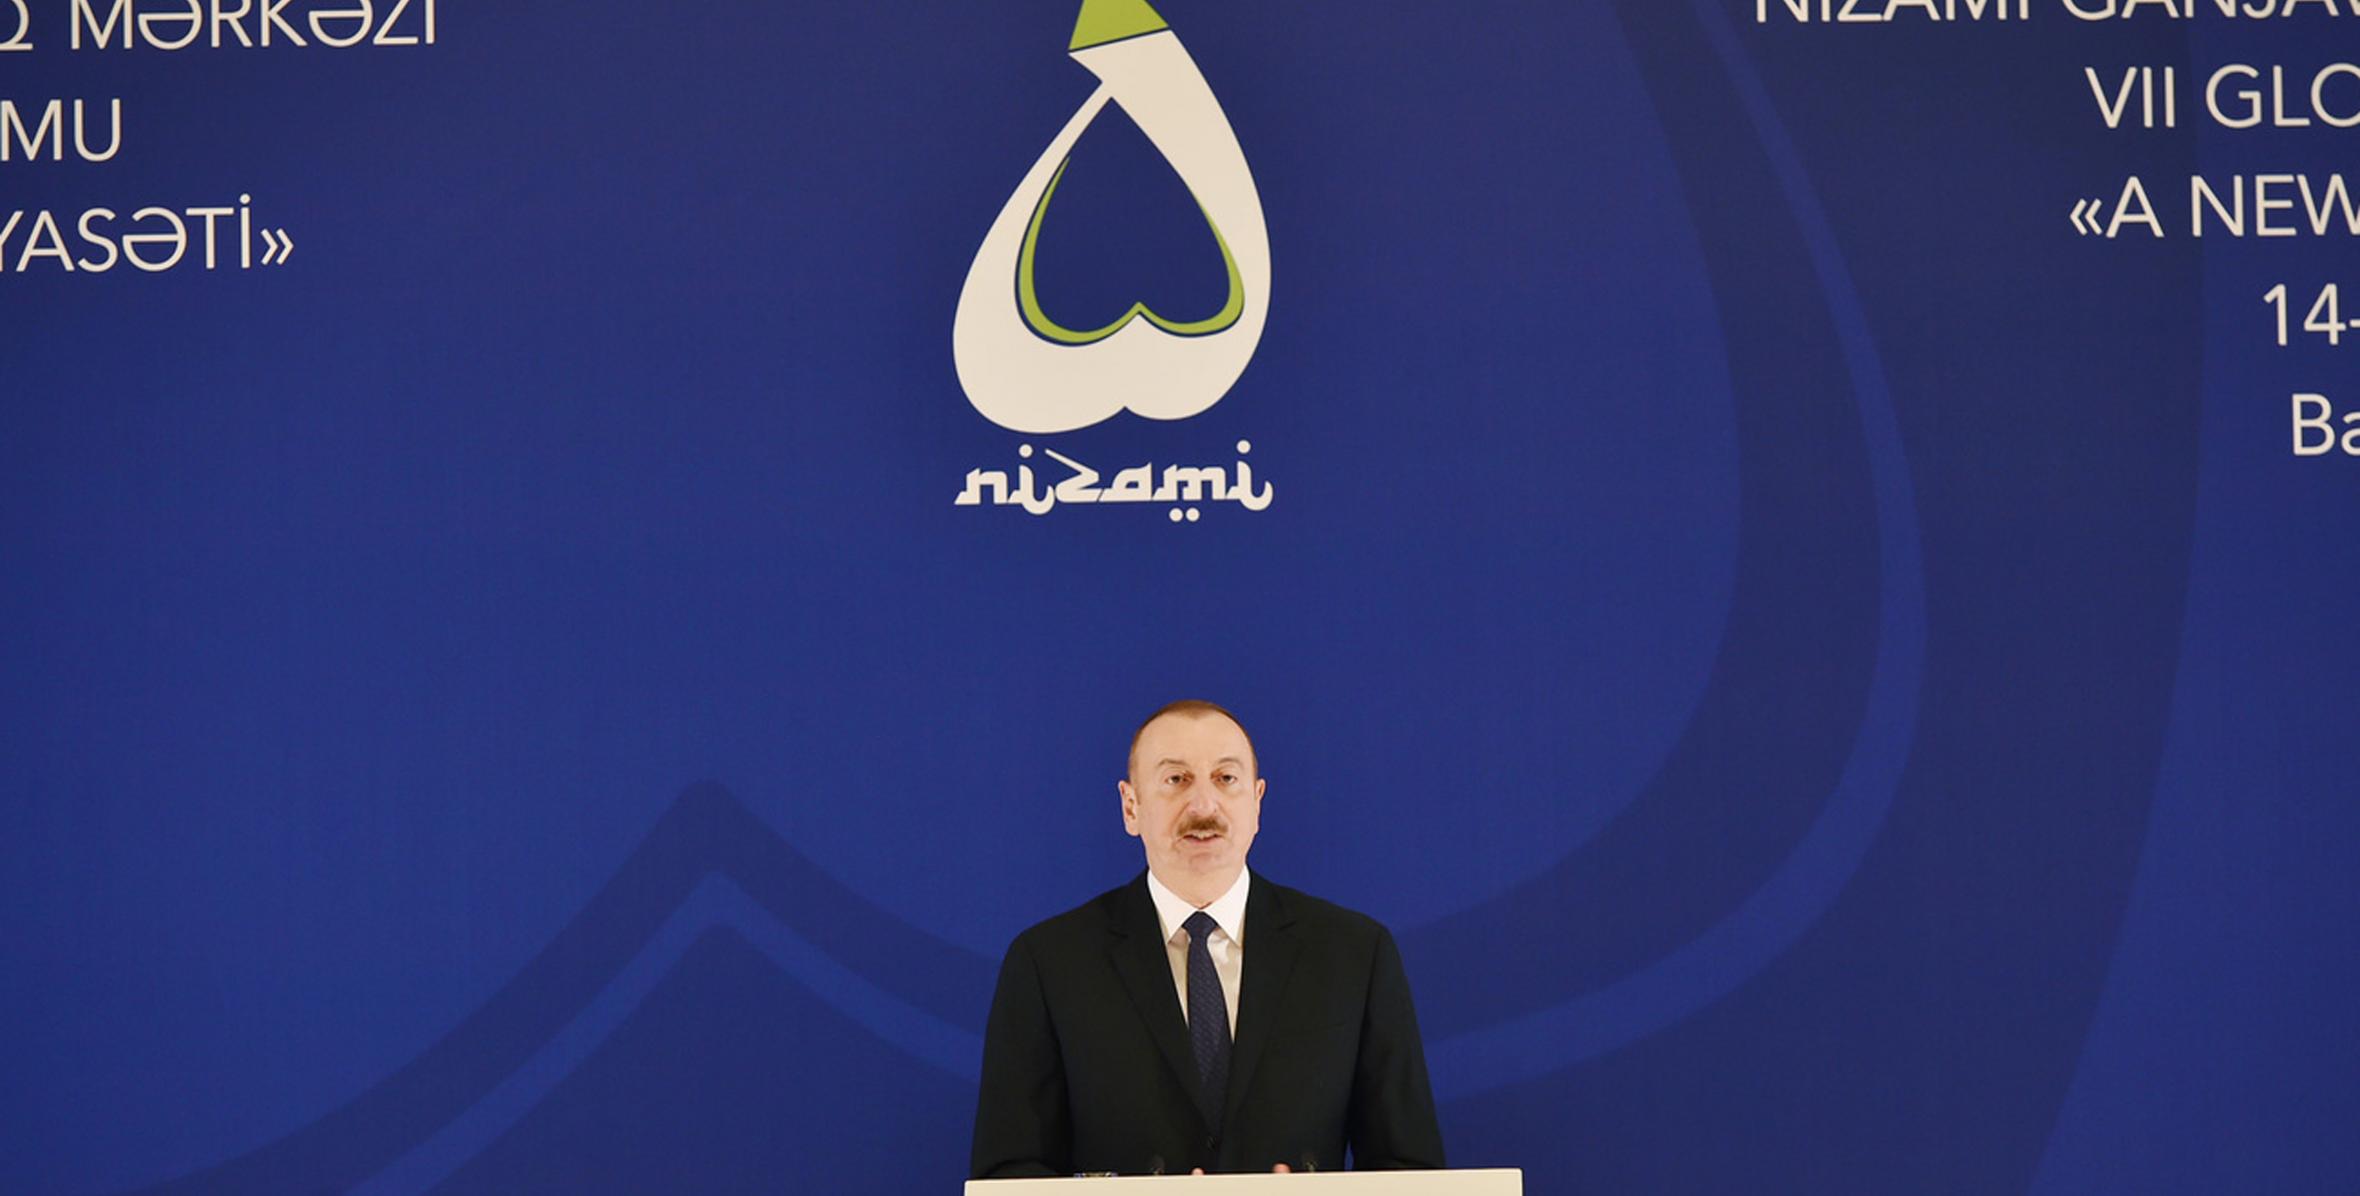 Speech by Ilham Aliyev at the opening ceremony of the 7th Global Baku Forum